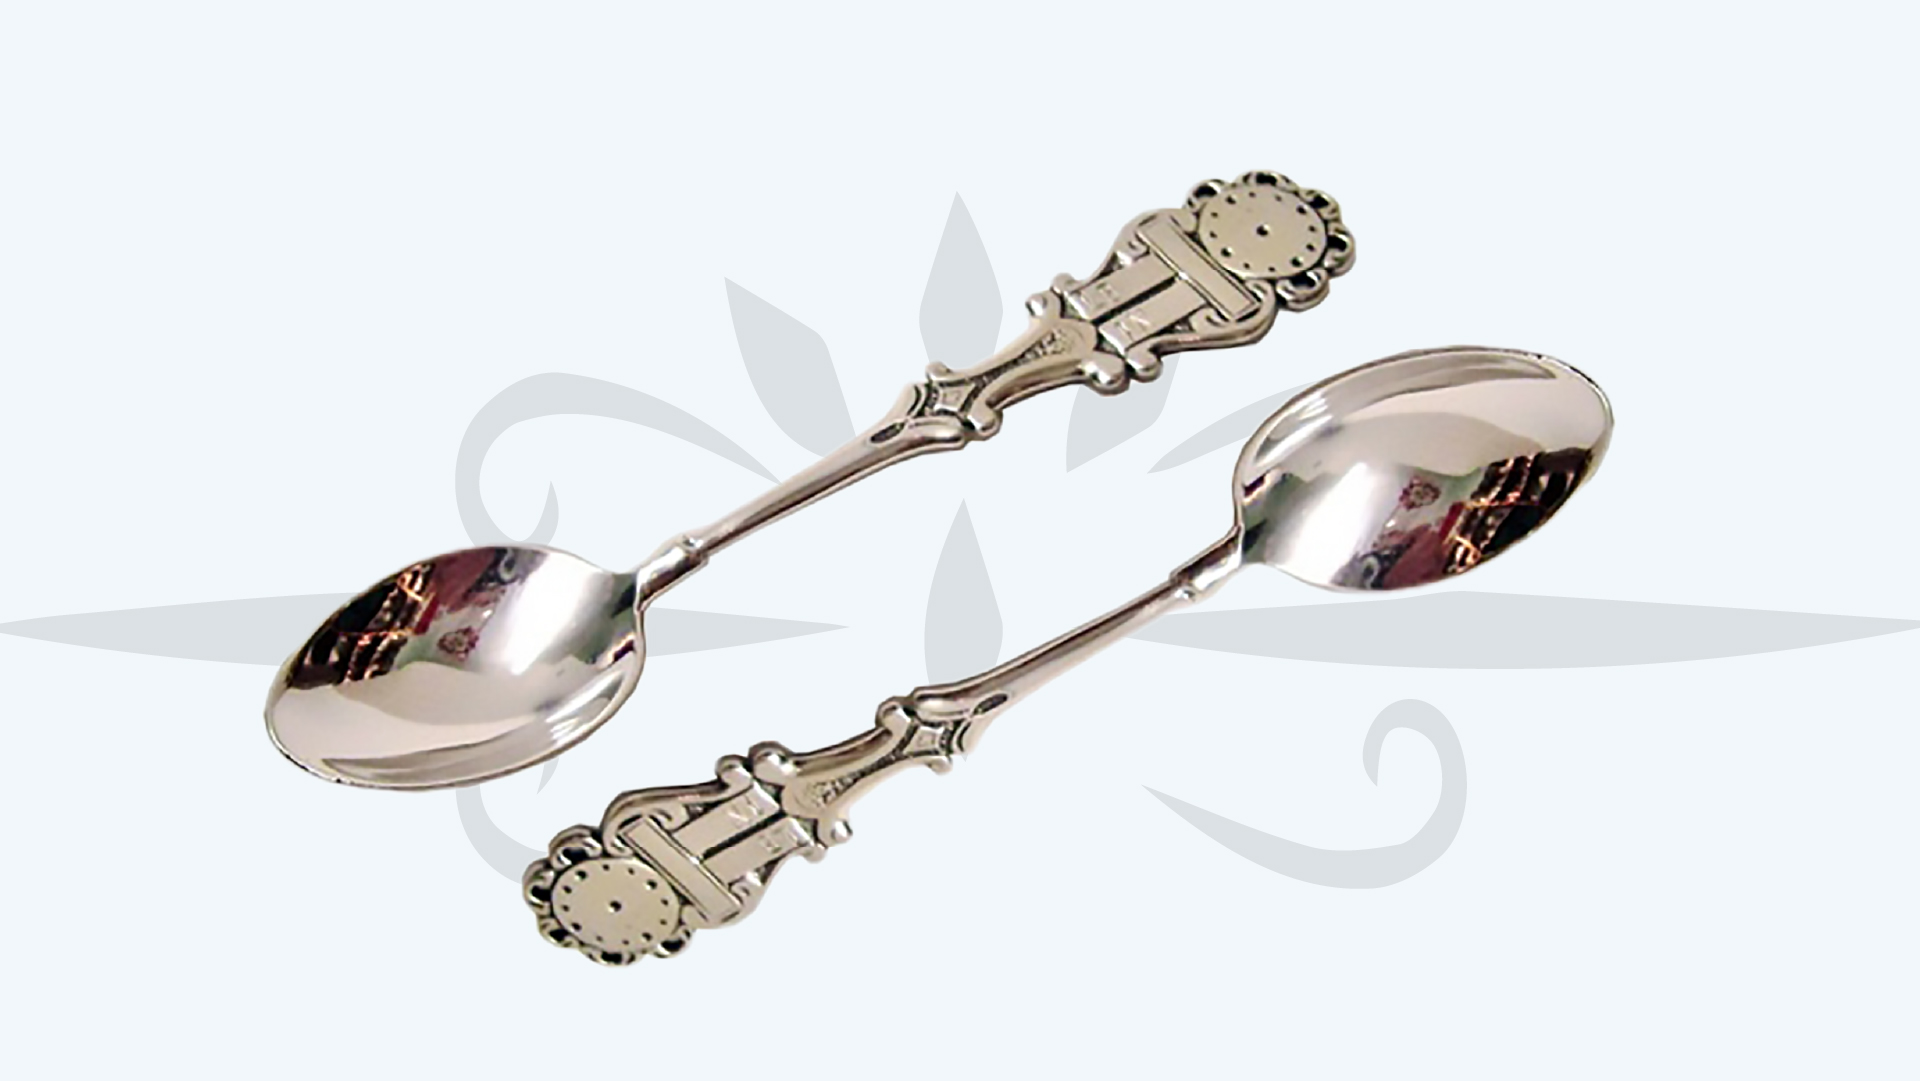 Silver Spoon for Baby Vs. Other Materials